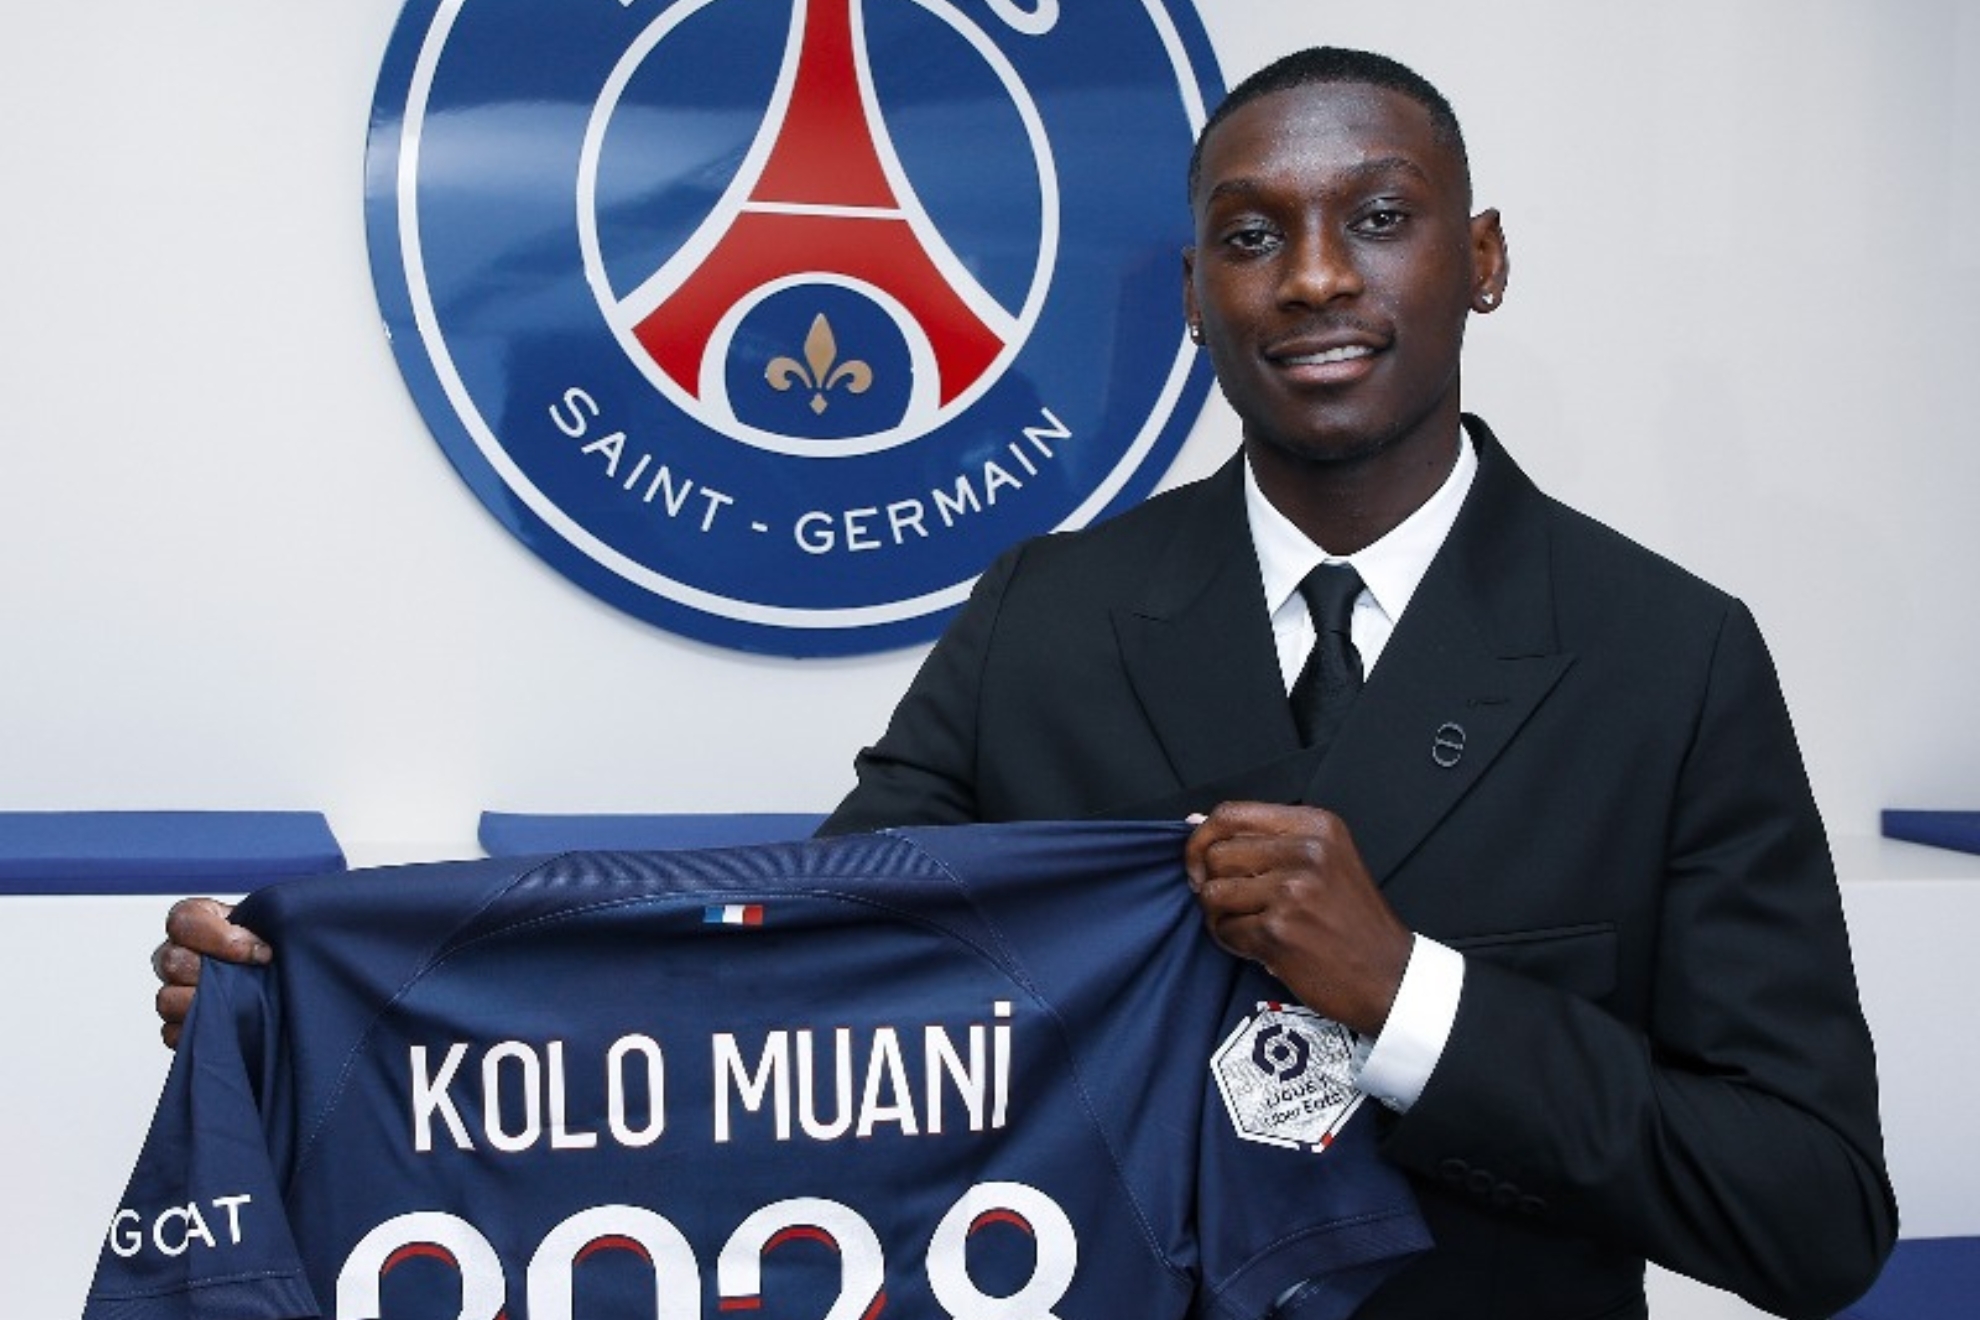 Kolo Muani joins his boyhood club and secures his dream move